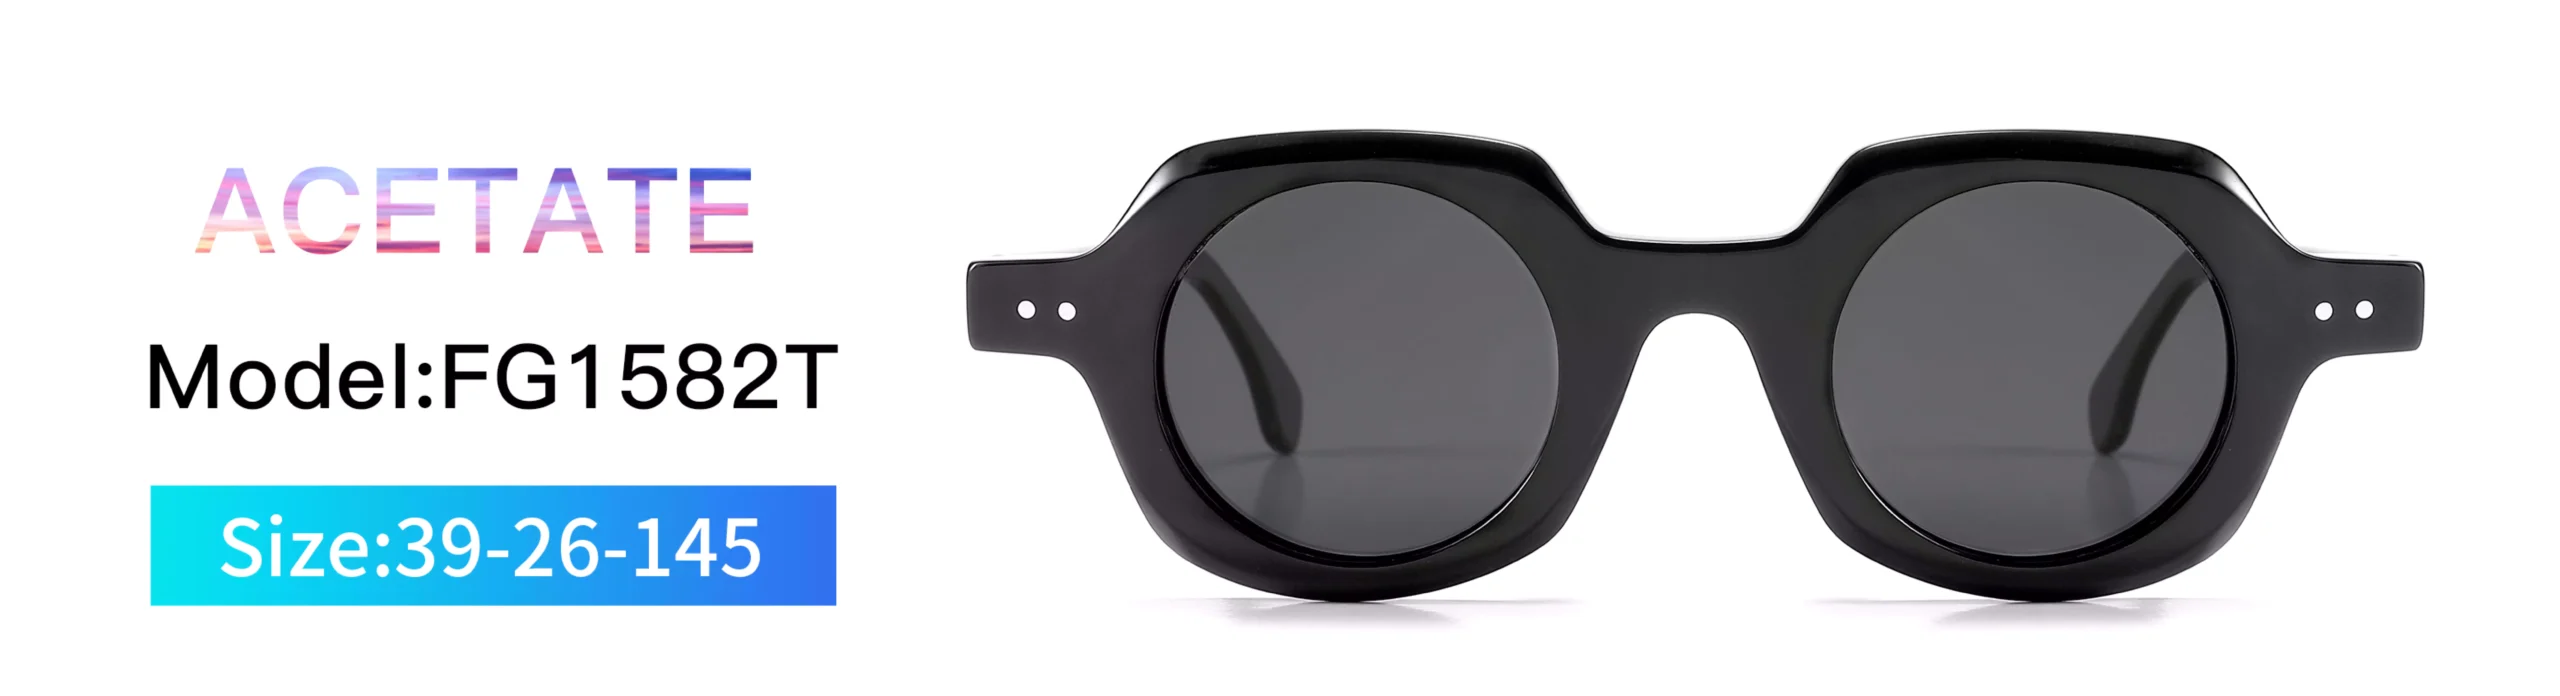 Sunglasses FG1582T, Acetate, Model, Size, Front Display, Round, Black